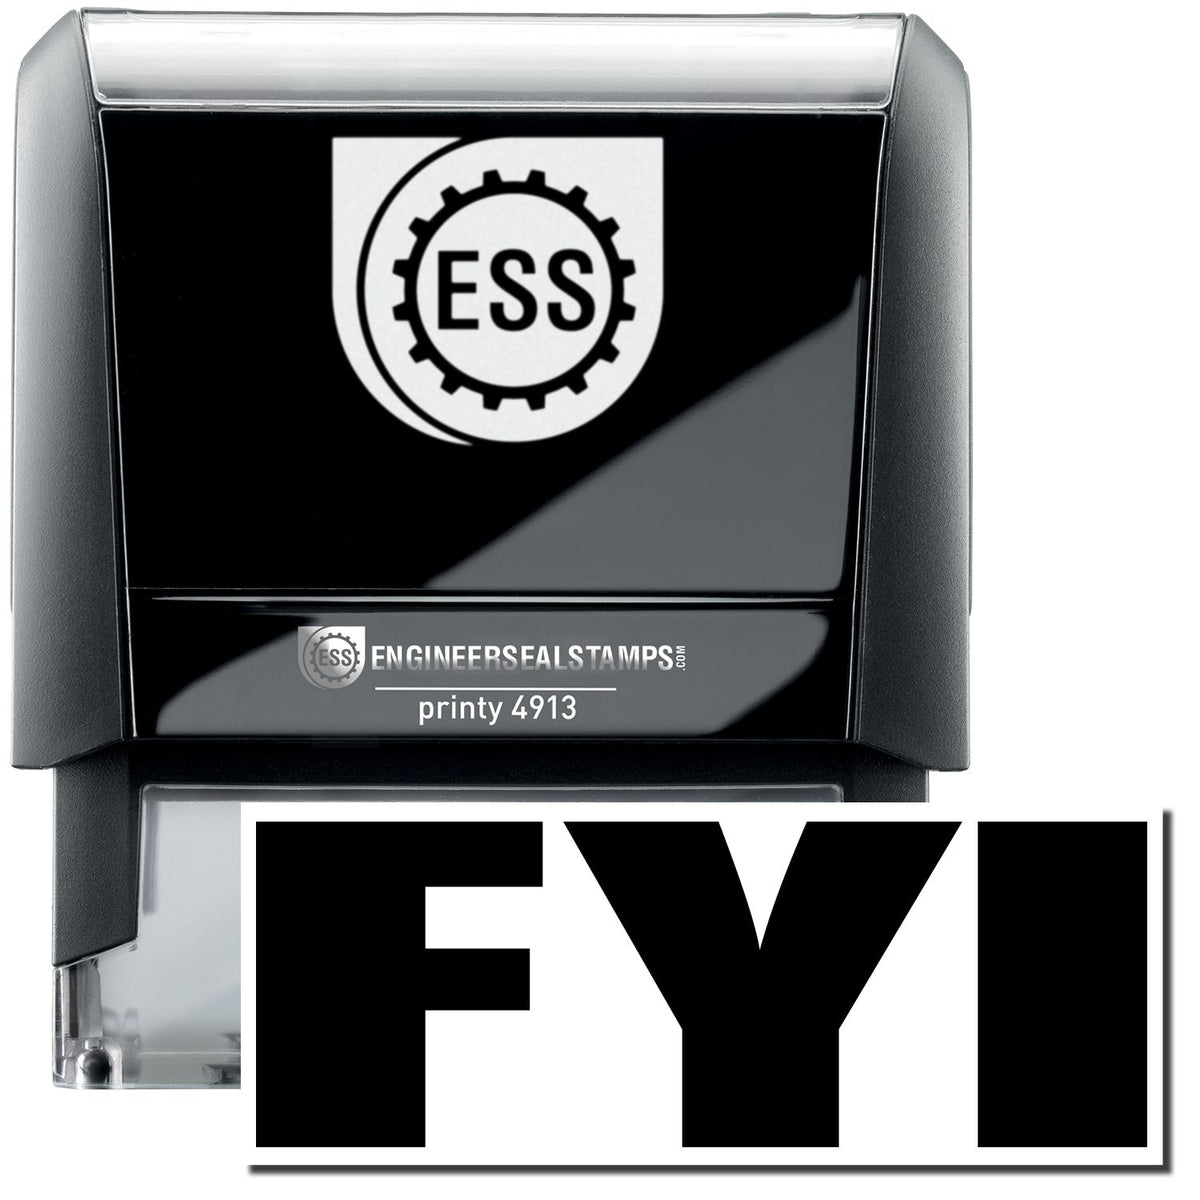 A self-inking stamp with a stamped image showing how the text &quot;FYI&quot; in a large bold font is displayed by it after stamping.